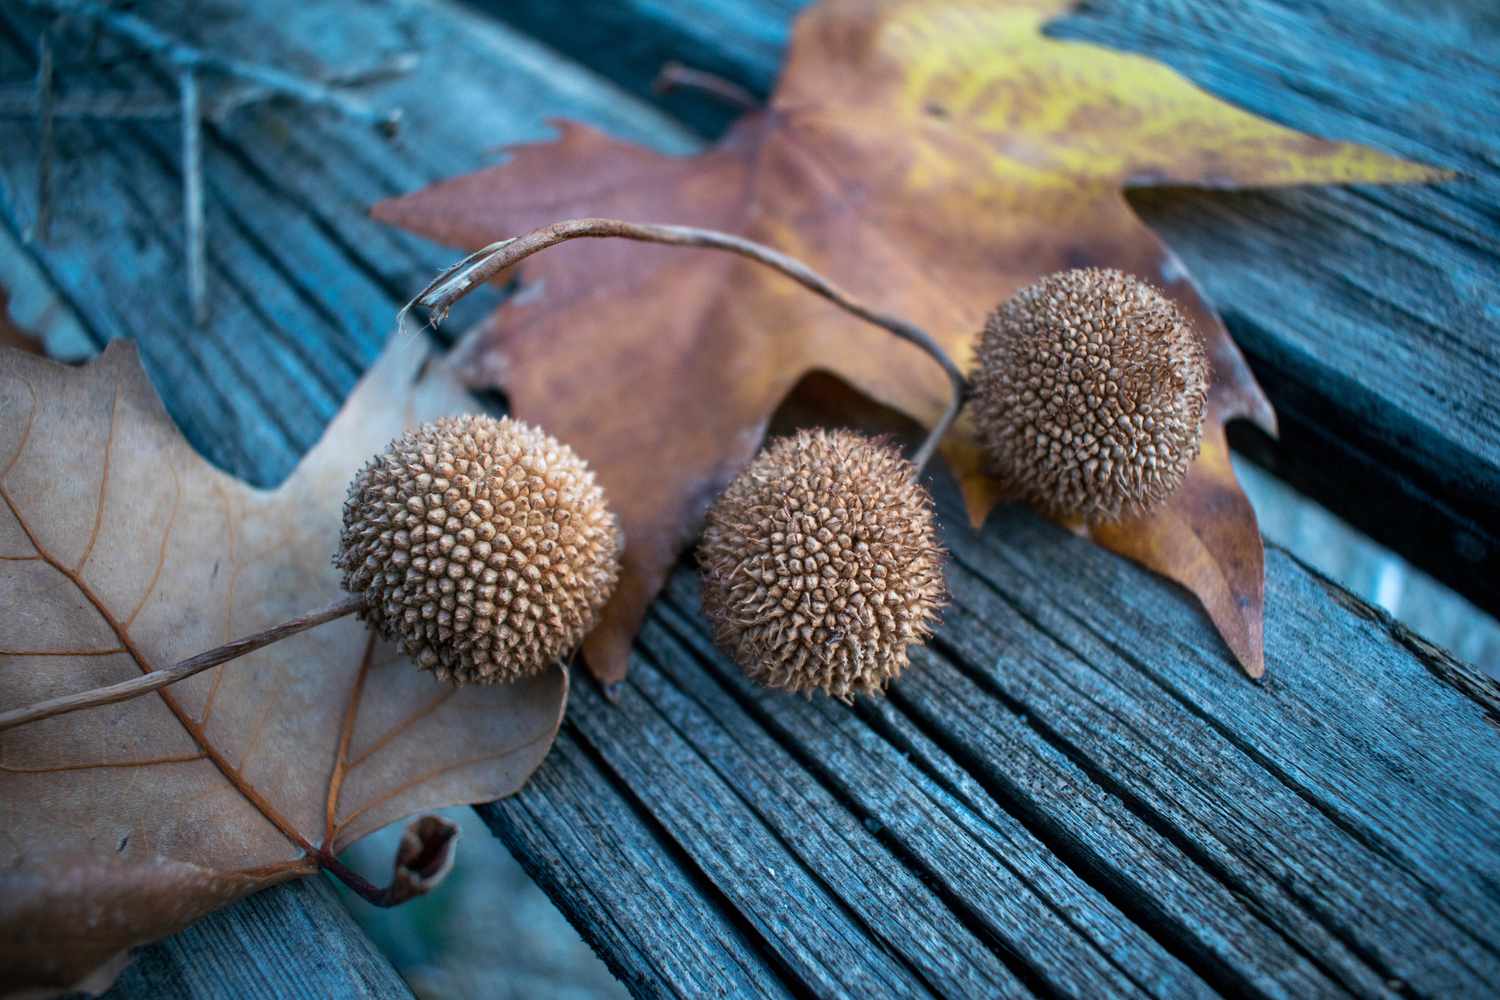 Are Sycamore Seeds Poisonous to Humans